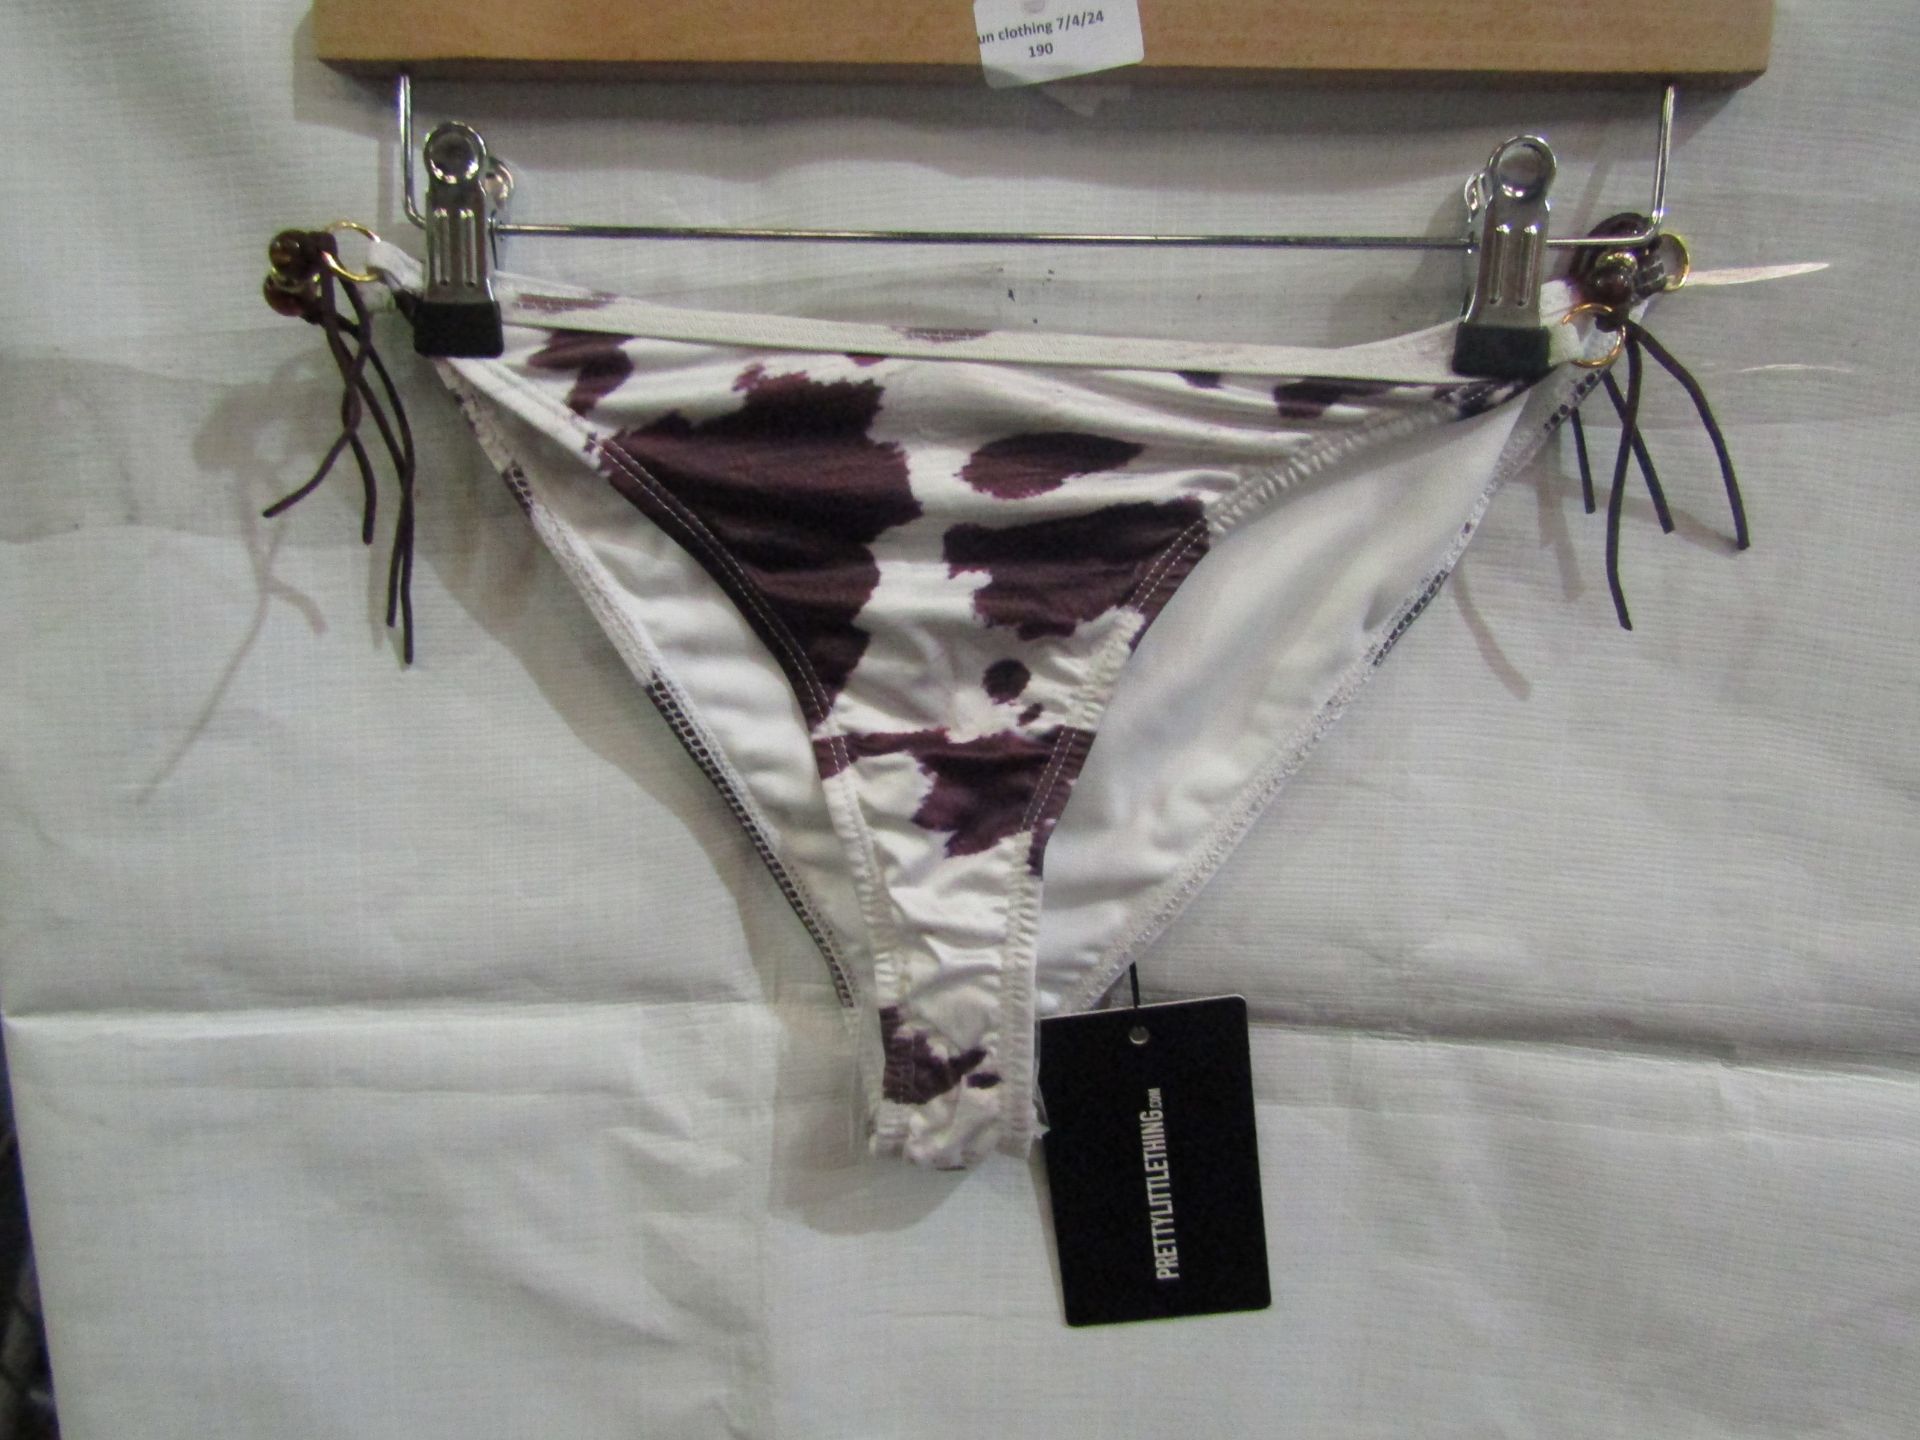 2x Pretty Little Thing Brown Cow Print Beaded Tie Bikini Bottoms - Size 4, New & Packaged.